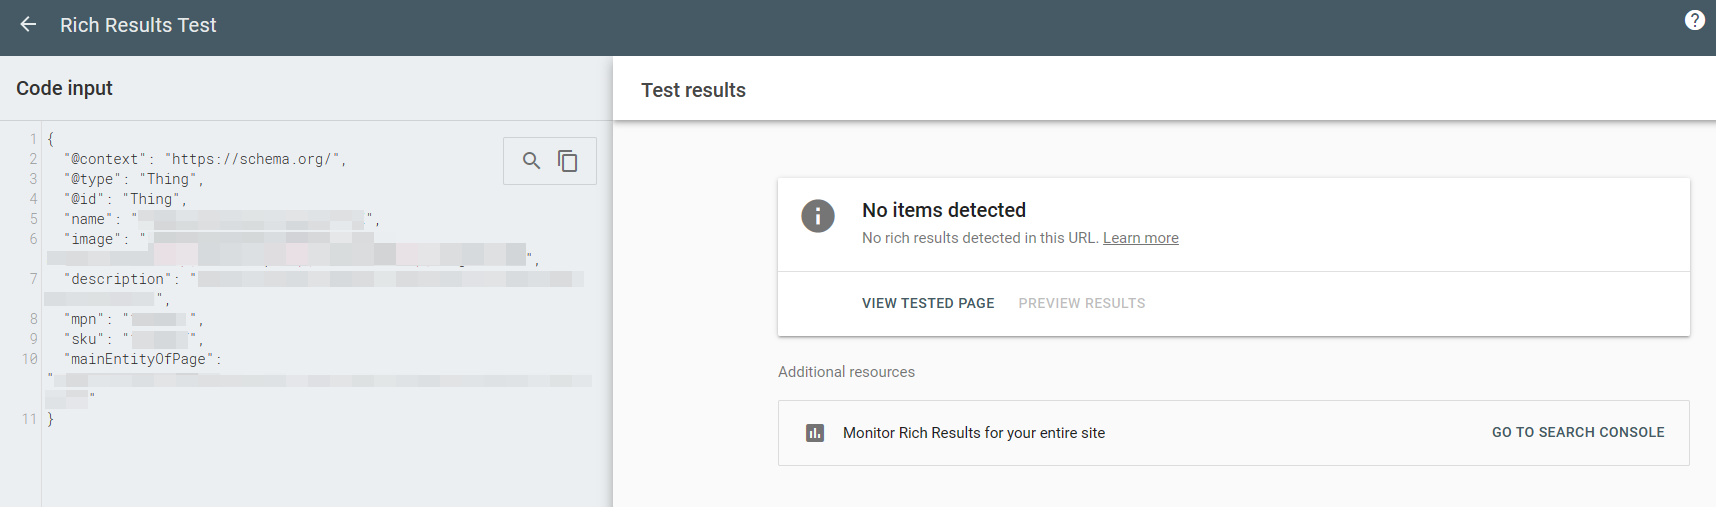 Rich Results Test in Google Search Console for ld+json schema Thing